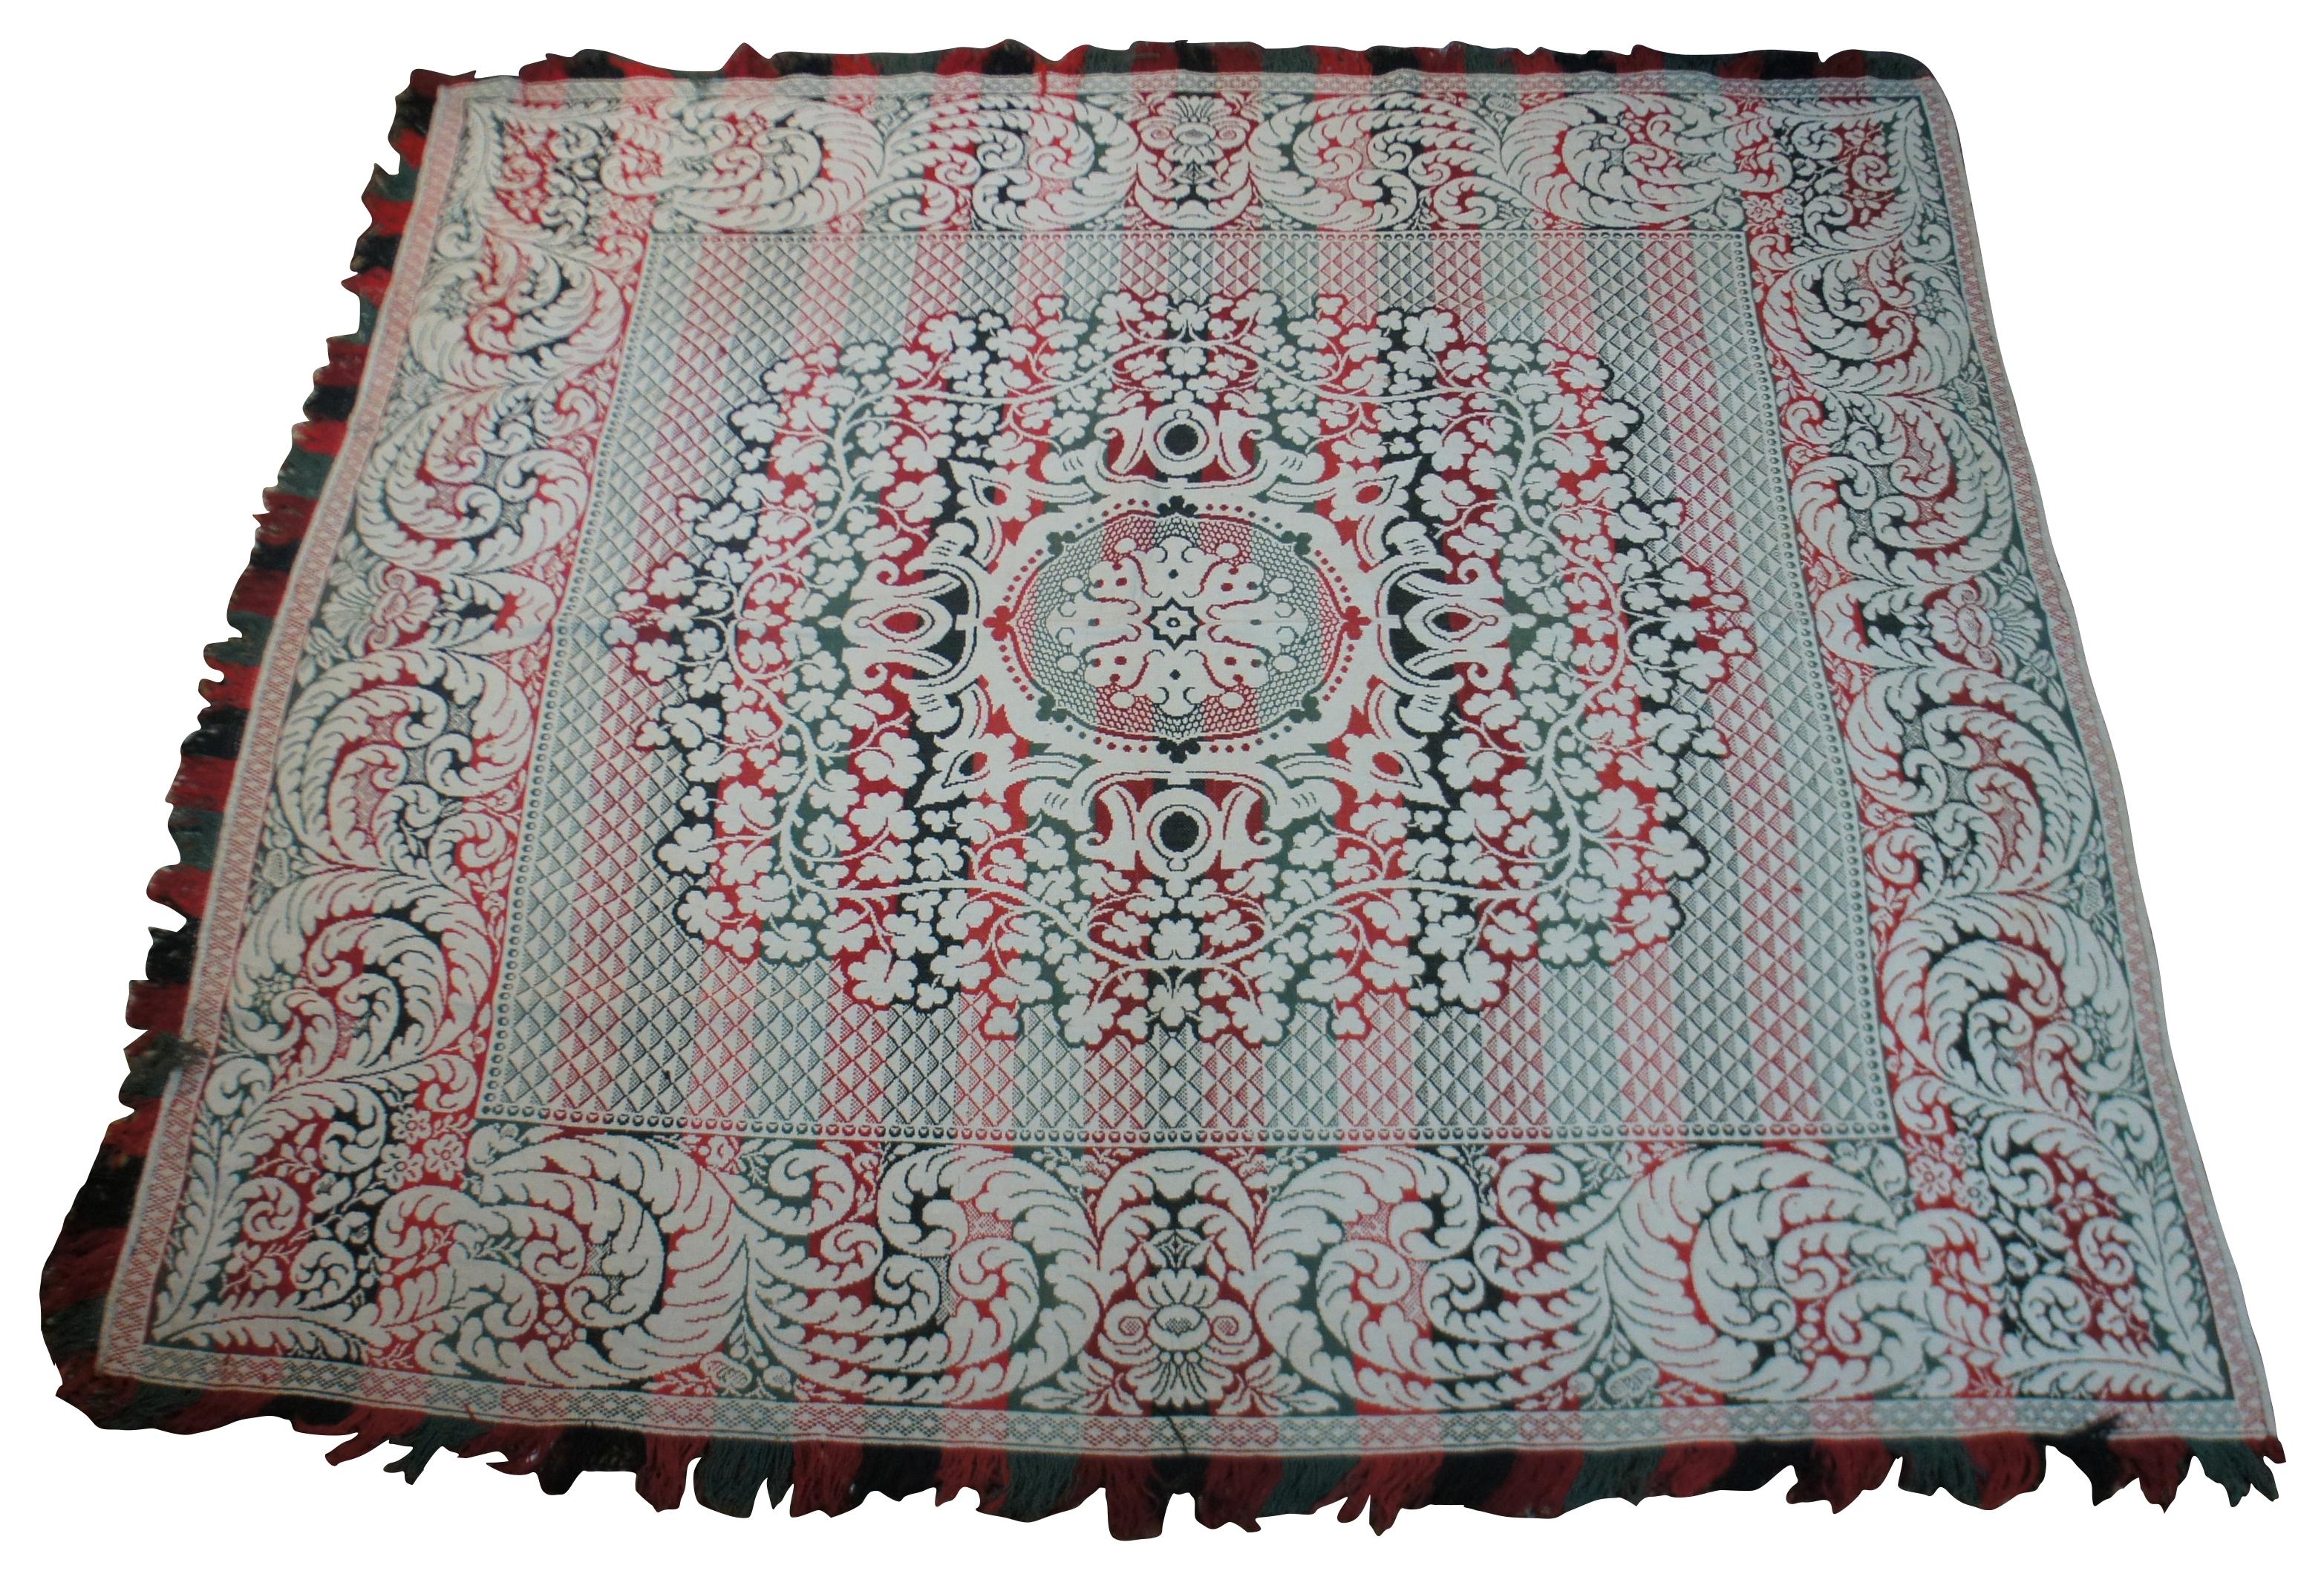 Vintage full or queen size green, red, and white woven blanket with a pattern of swirling leaves and flowers, and a tricolor fringe bordering three sides of the blanket.